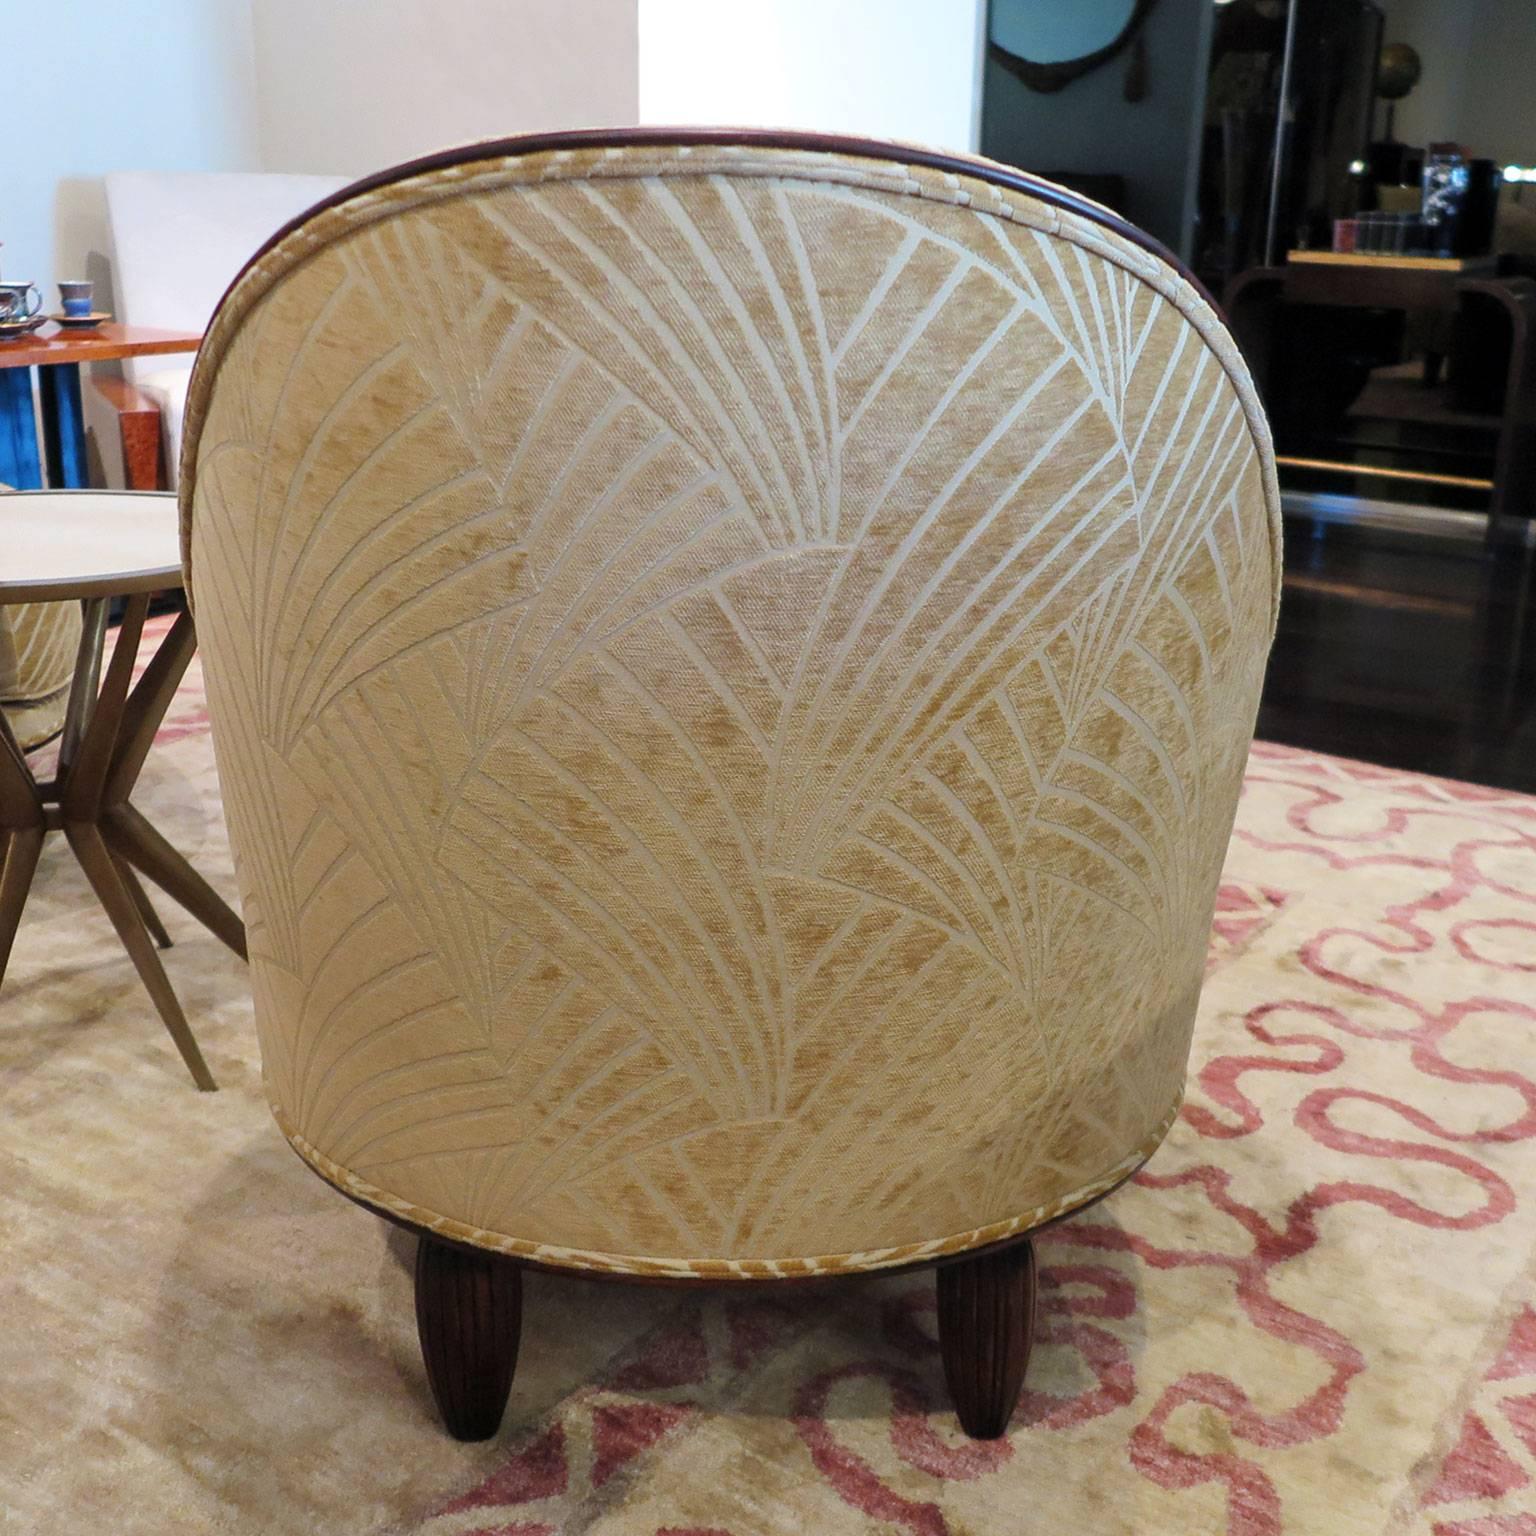 rounded chair